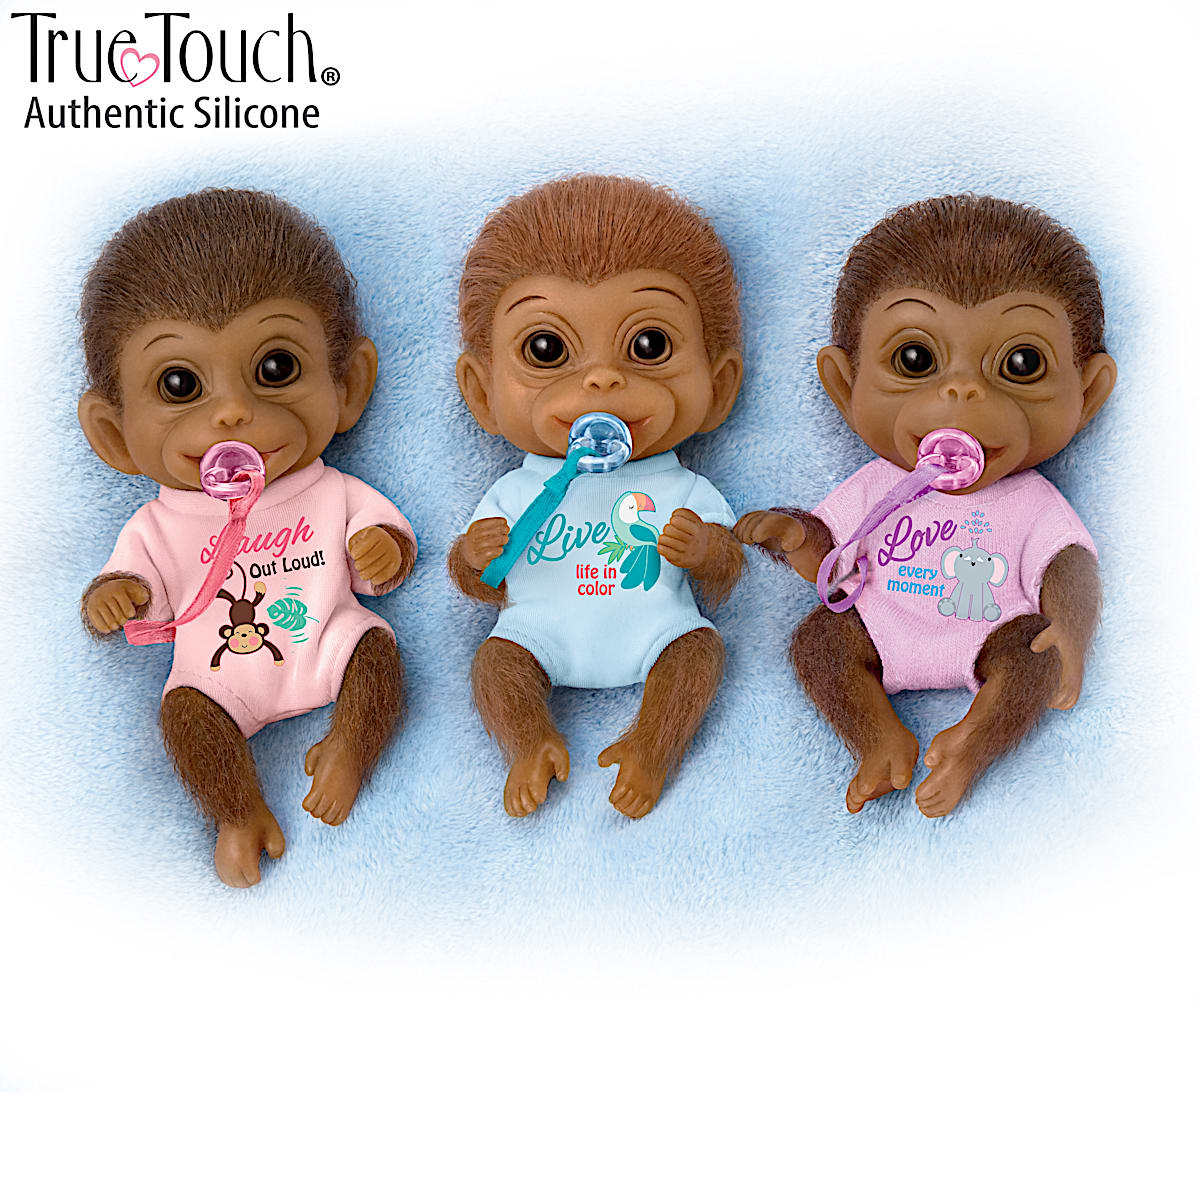 Happy Little Handfuls Miniature Silicone Monkey Doll Collection Featuring  Hand-Rooted Hair On Arms, Legs & Heads With Pacifiers And Custom Outfits